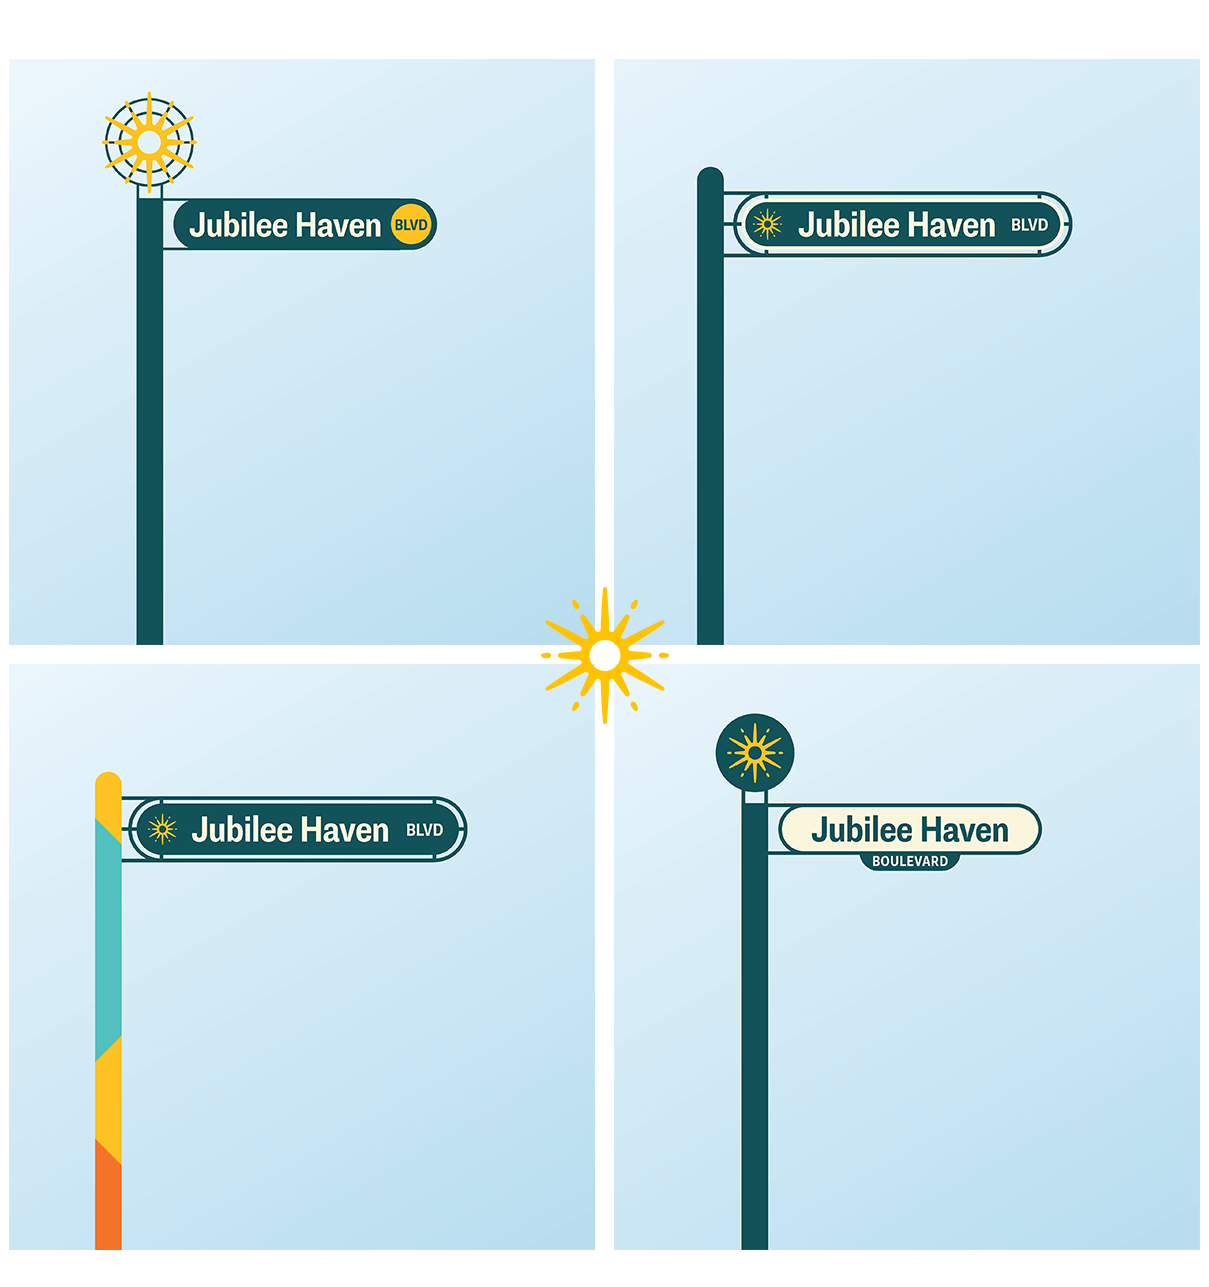 Layout of 4 different street sign designs for Jubilee